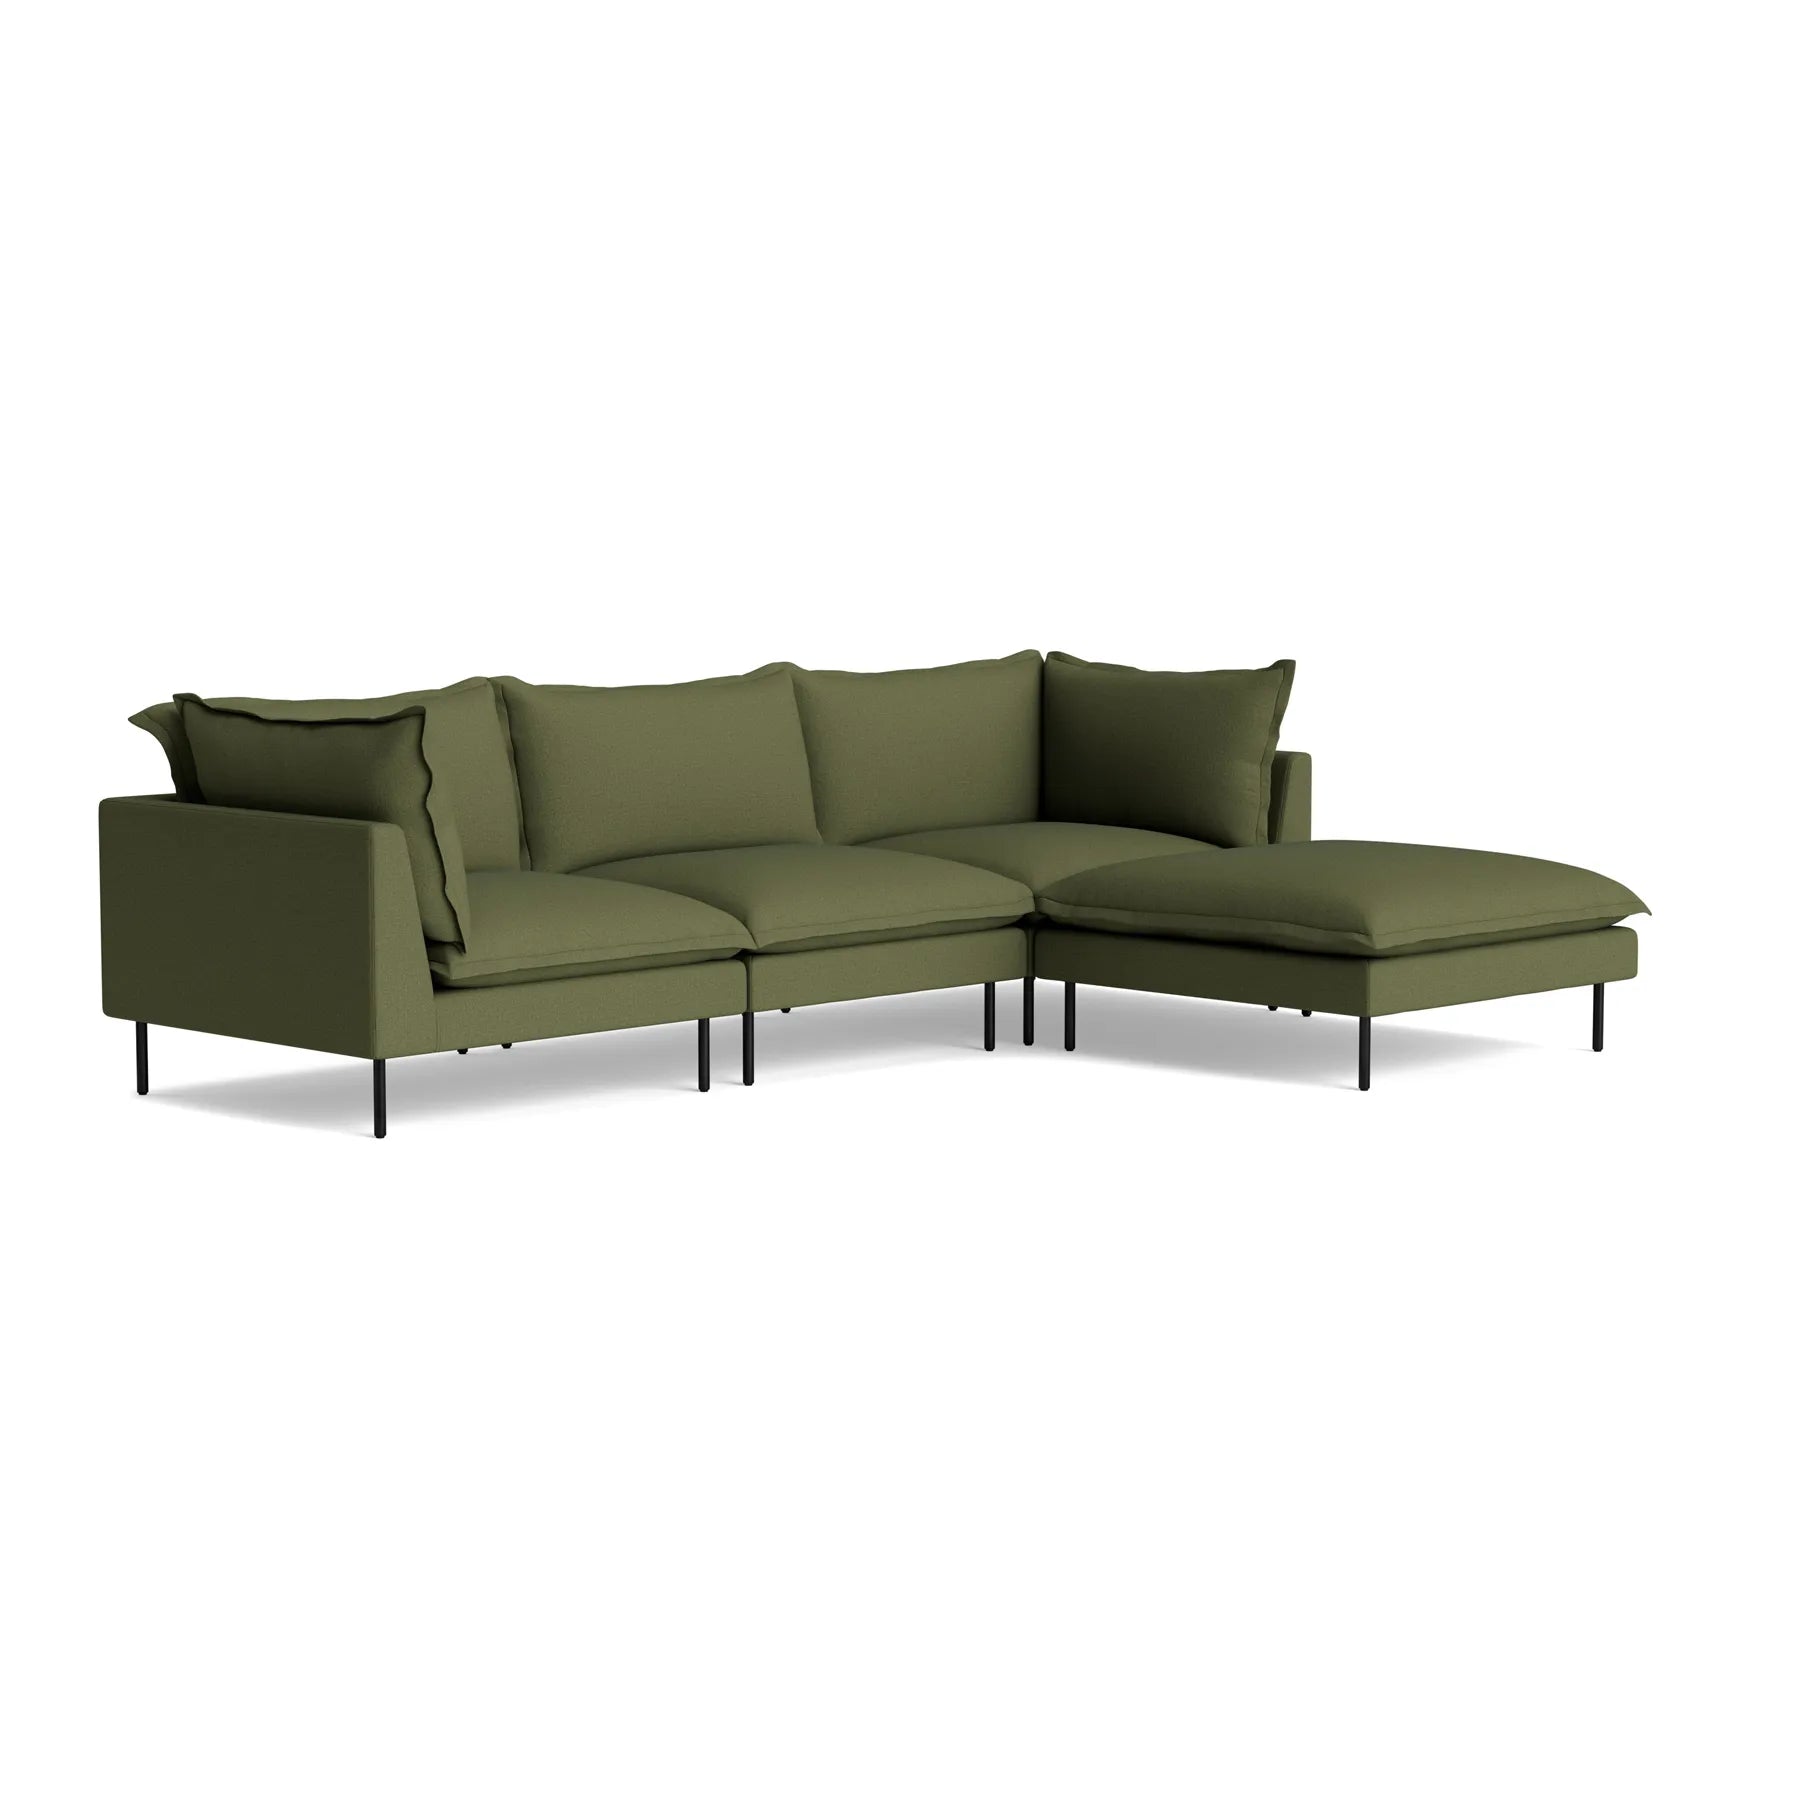 Buy Seam 4 Seater Chaise Sofa - Siena Forest by RJ Living online - RJ Living